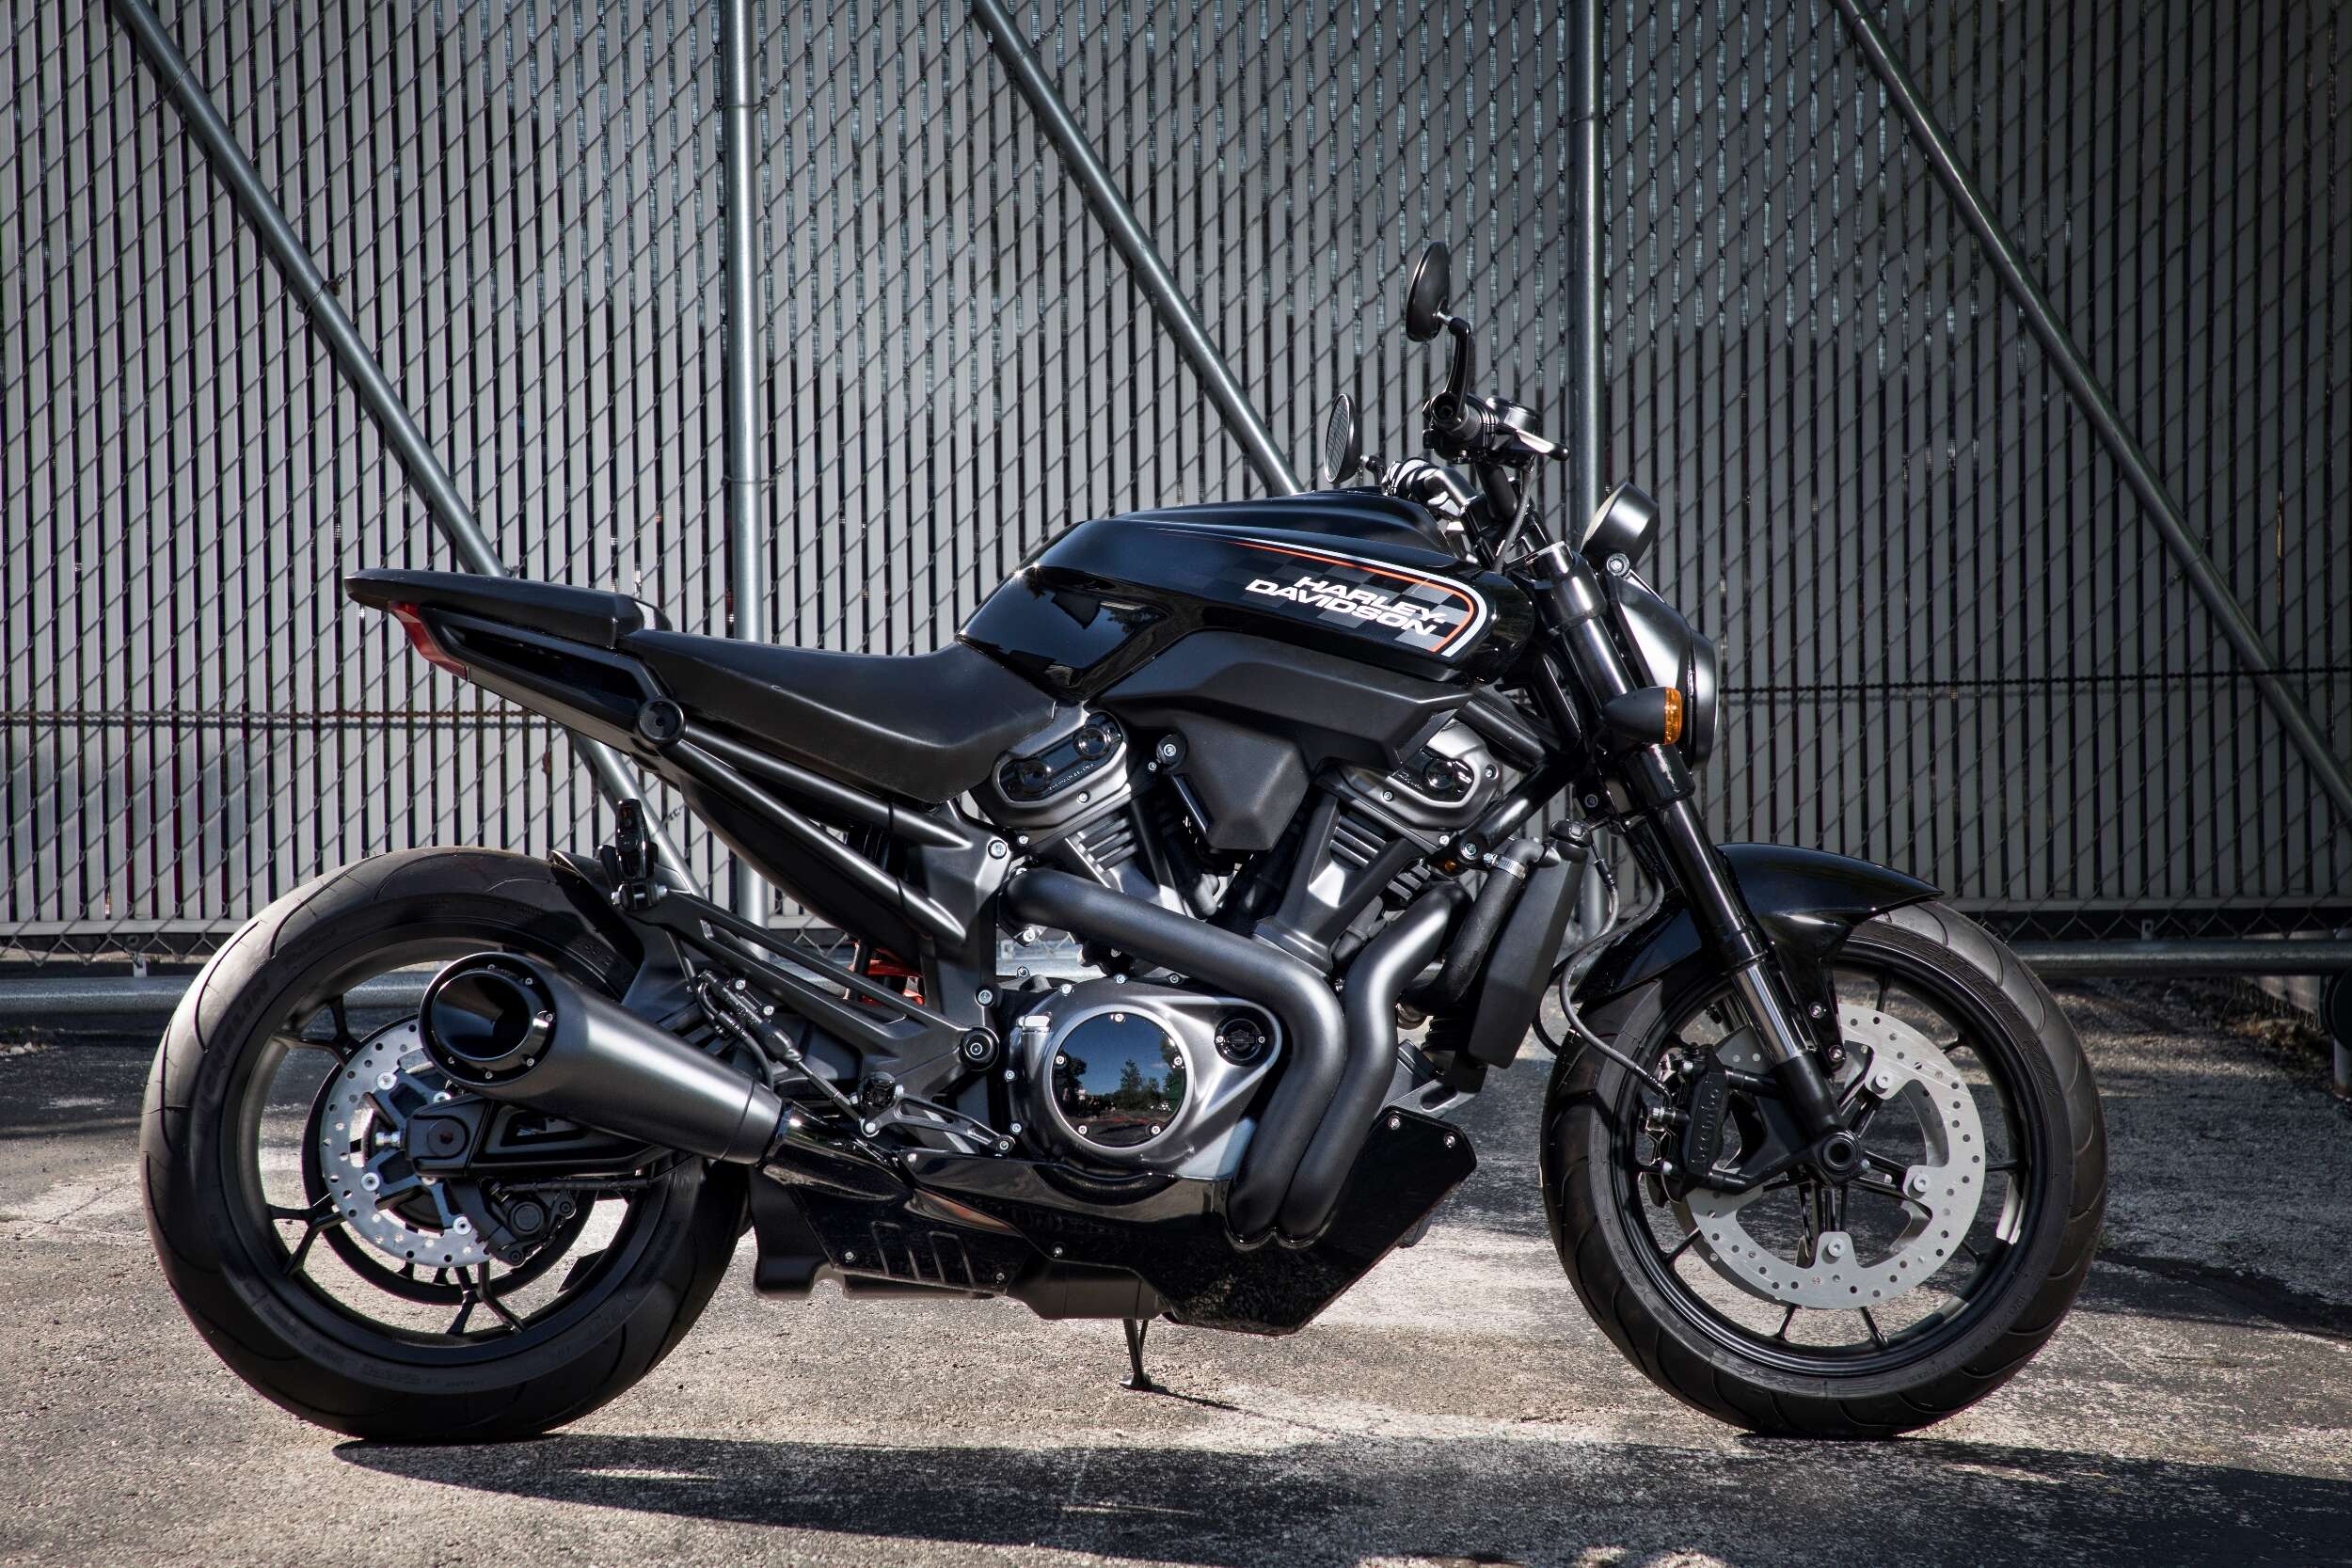 HarleyDavidson to Launch a Naked Bike and Adventure Bike in 2020 The